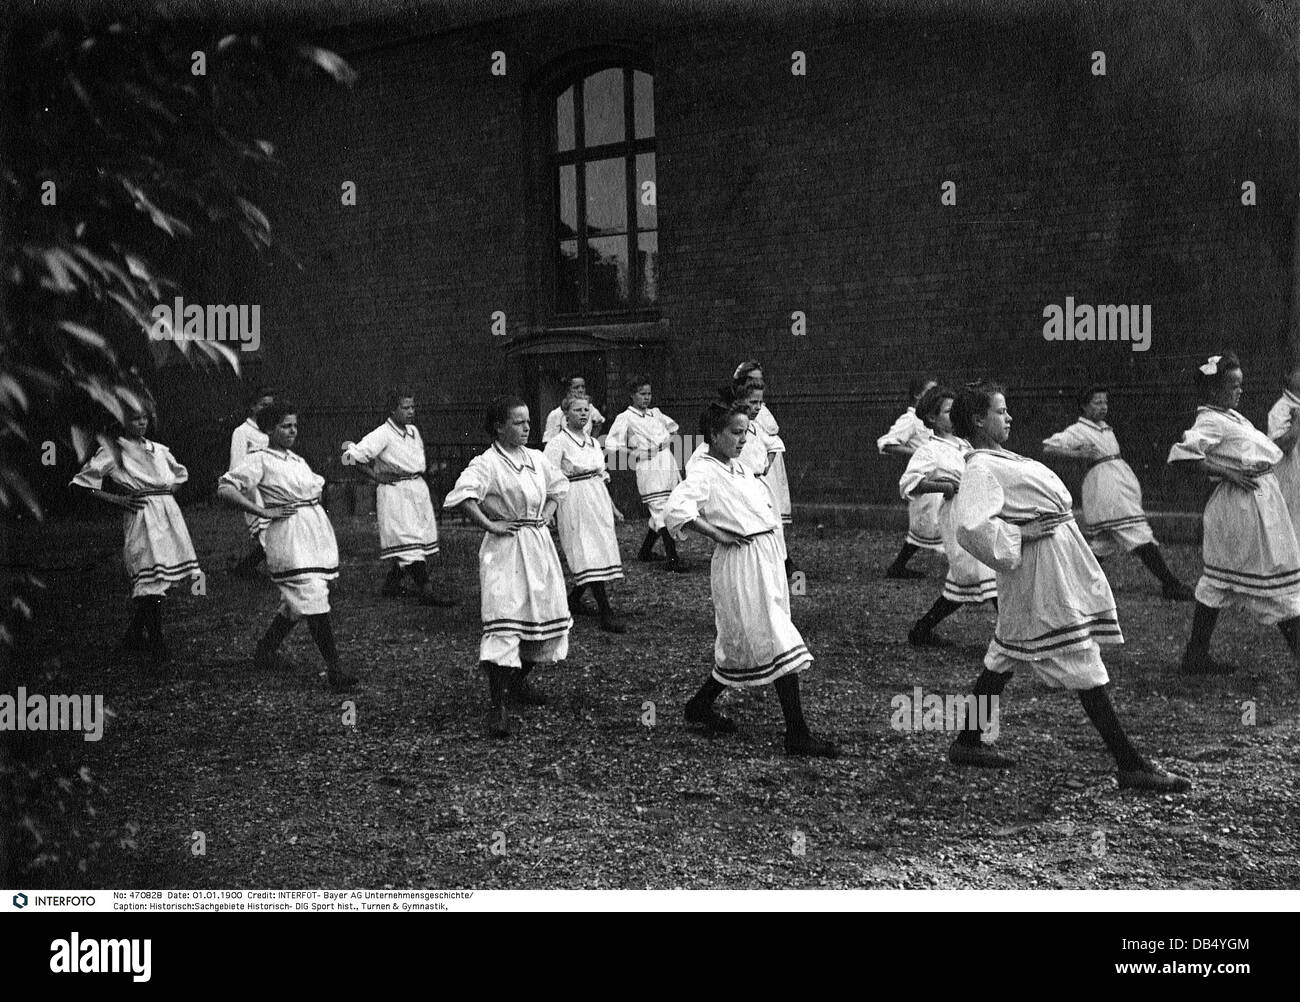 sports, gymnastics, TuS 04, employees of the pharma camp during lesson, 1.1.1903, 20th century, historic, historical, forerunner of SV Bayer 04 Leverkusen, practise gymnastics, doing gymnastics, full length, people, 1900s, Additional-Rights-Clearences-Not Available Stock Photo